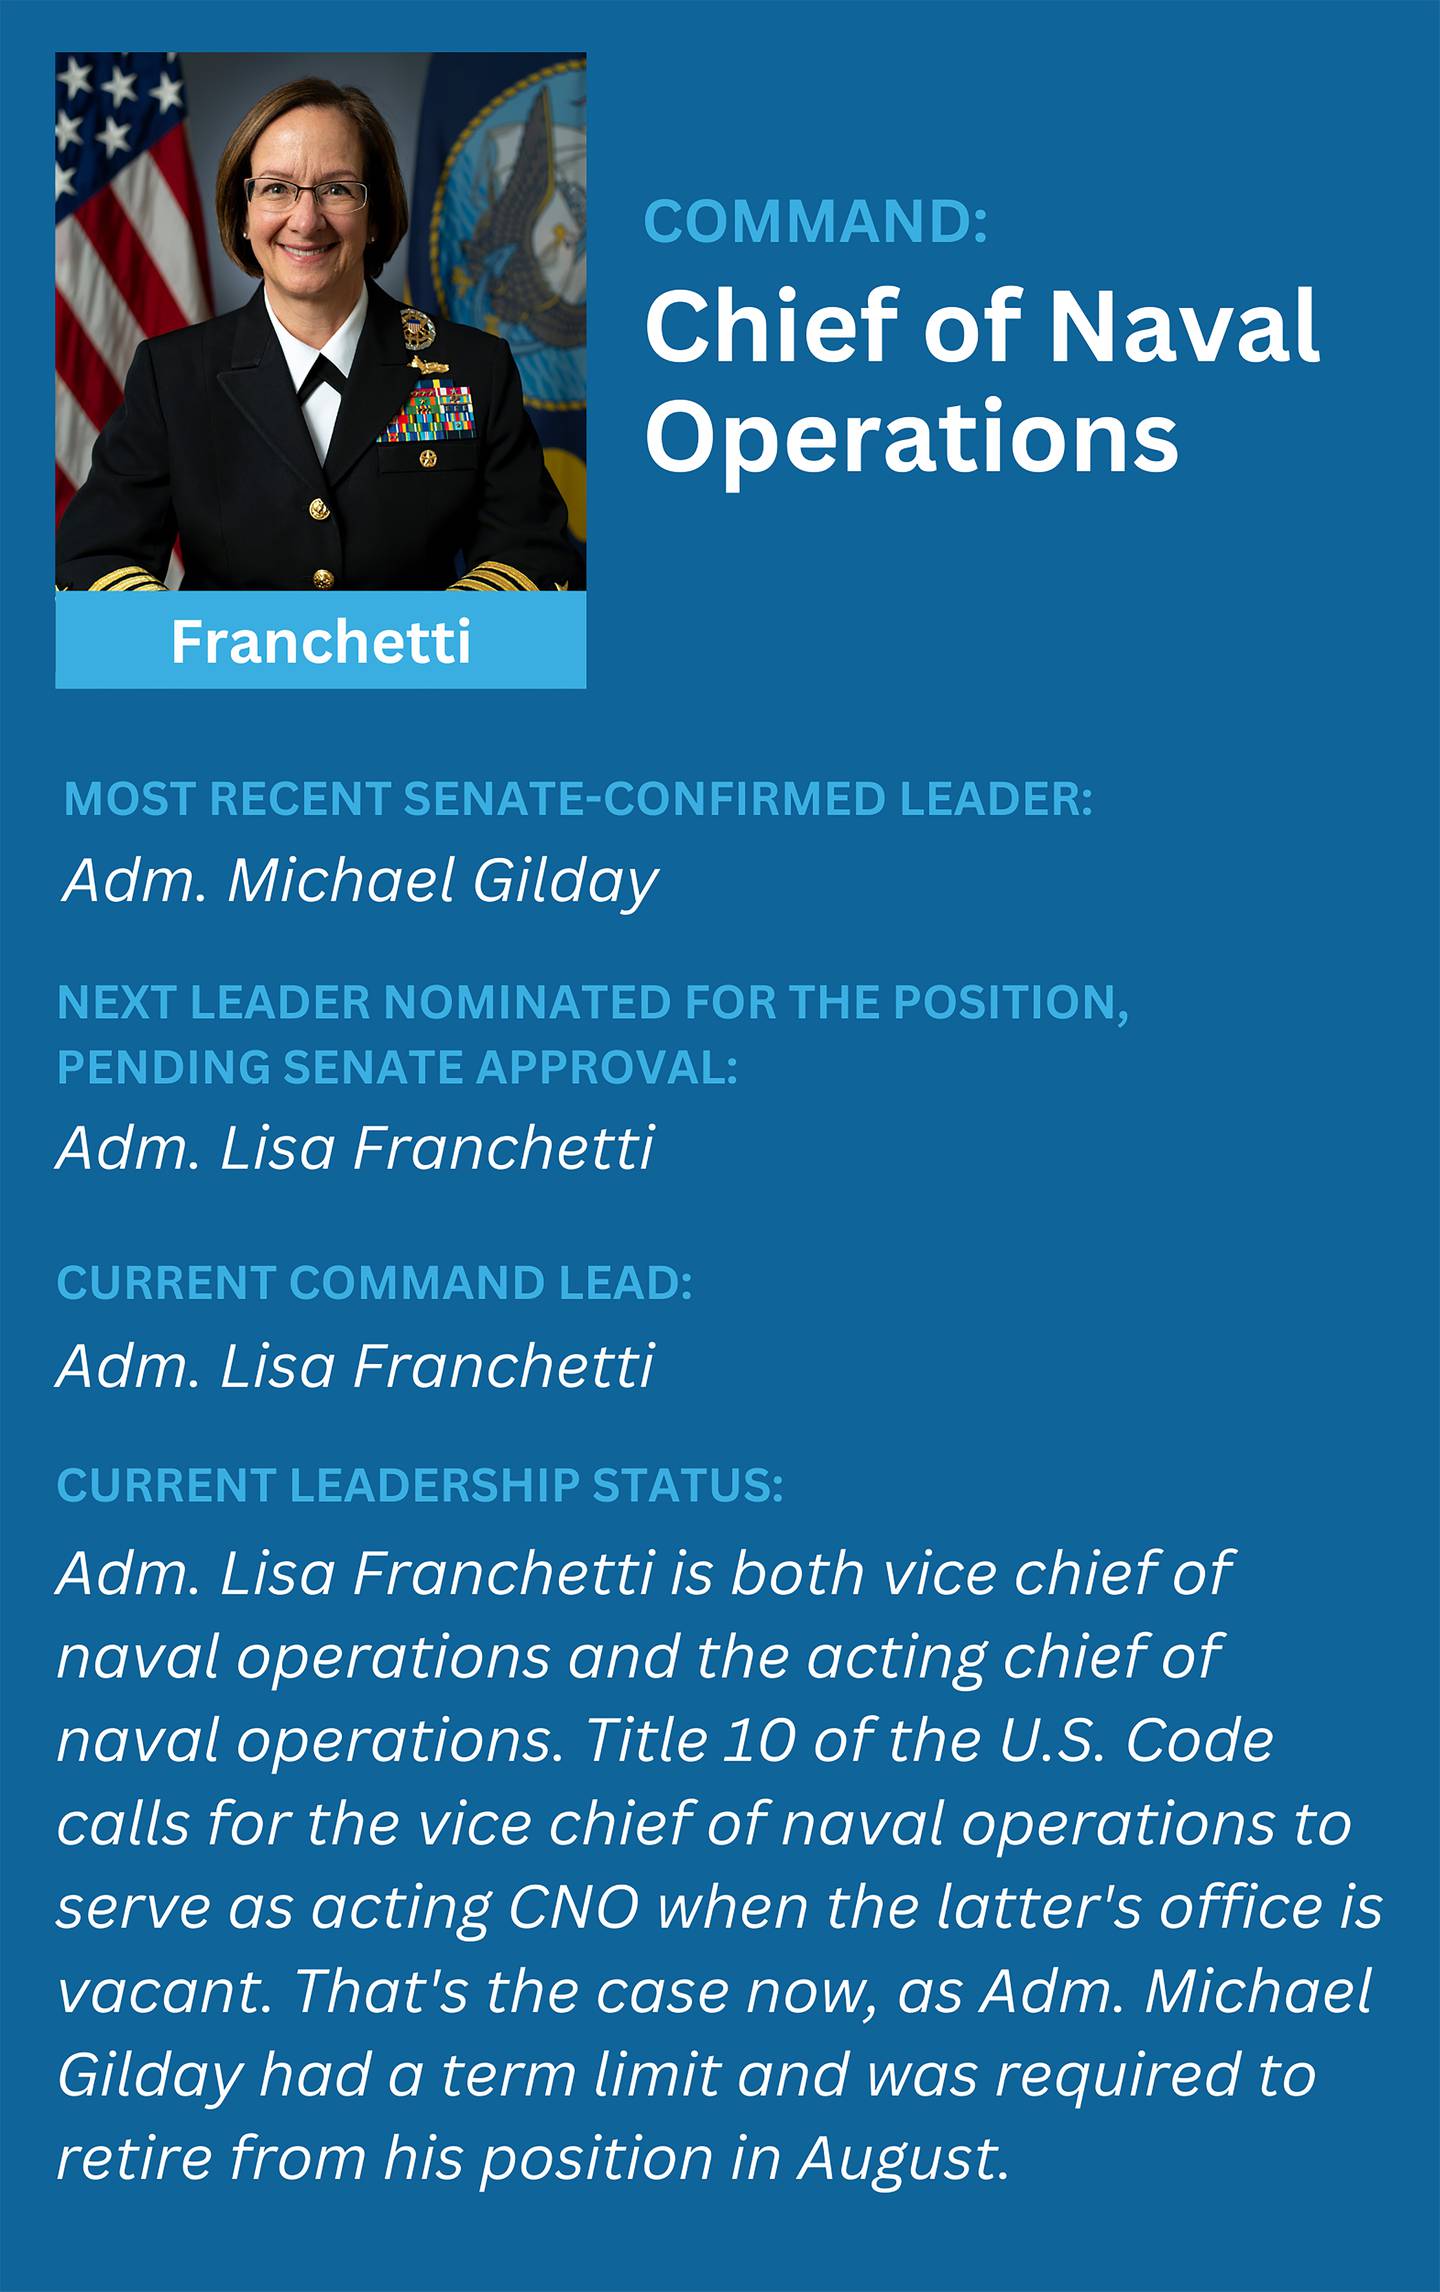 These US Navy commands canât bring in new leaders. So whoâs in charge?